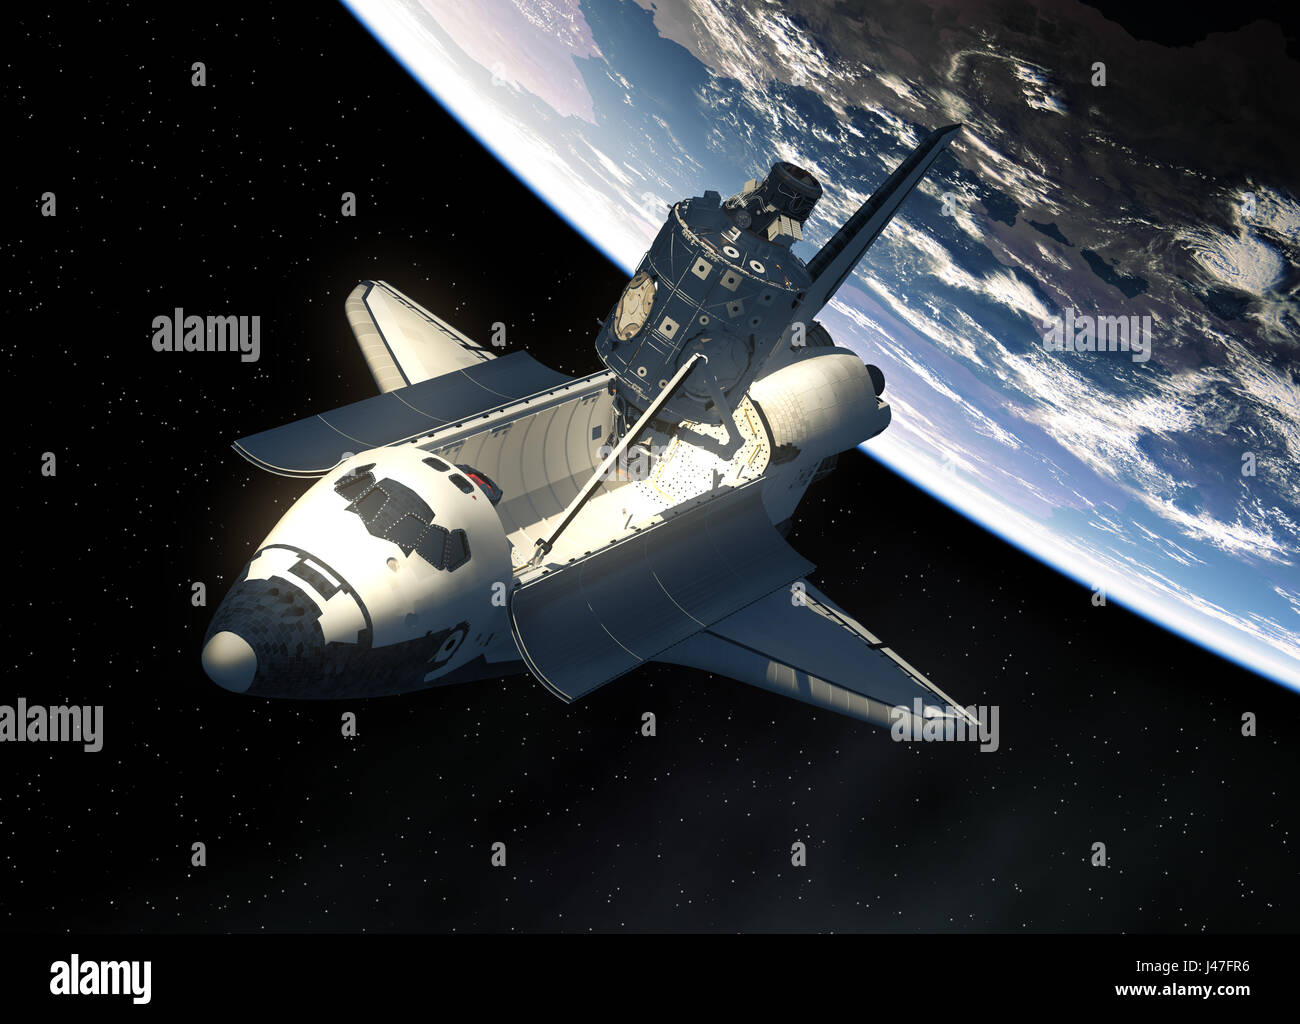 Space Shuttle And Module Of International Space Station Stock Photo